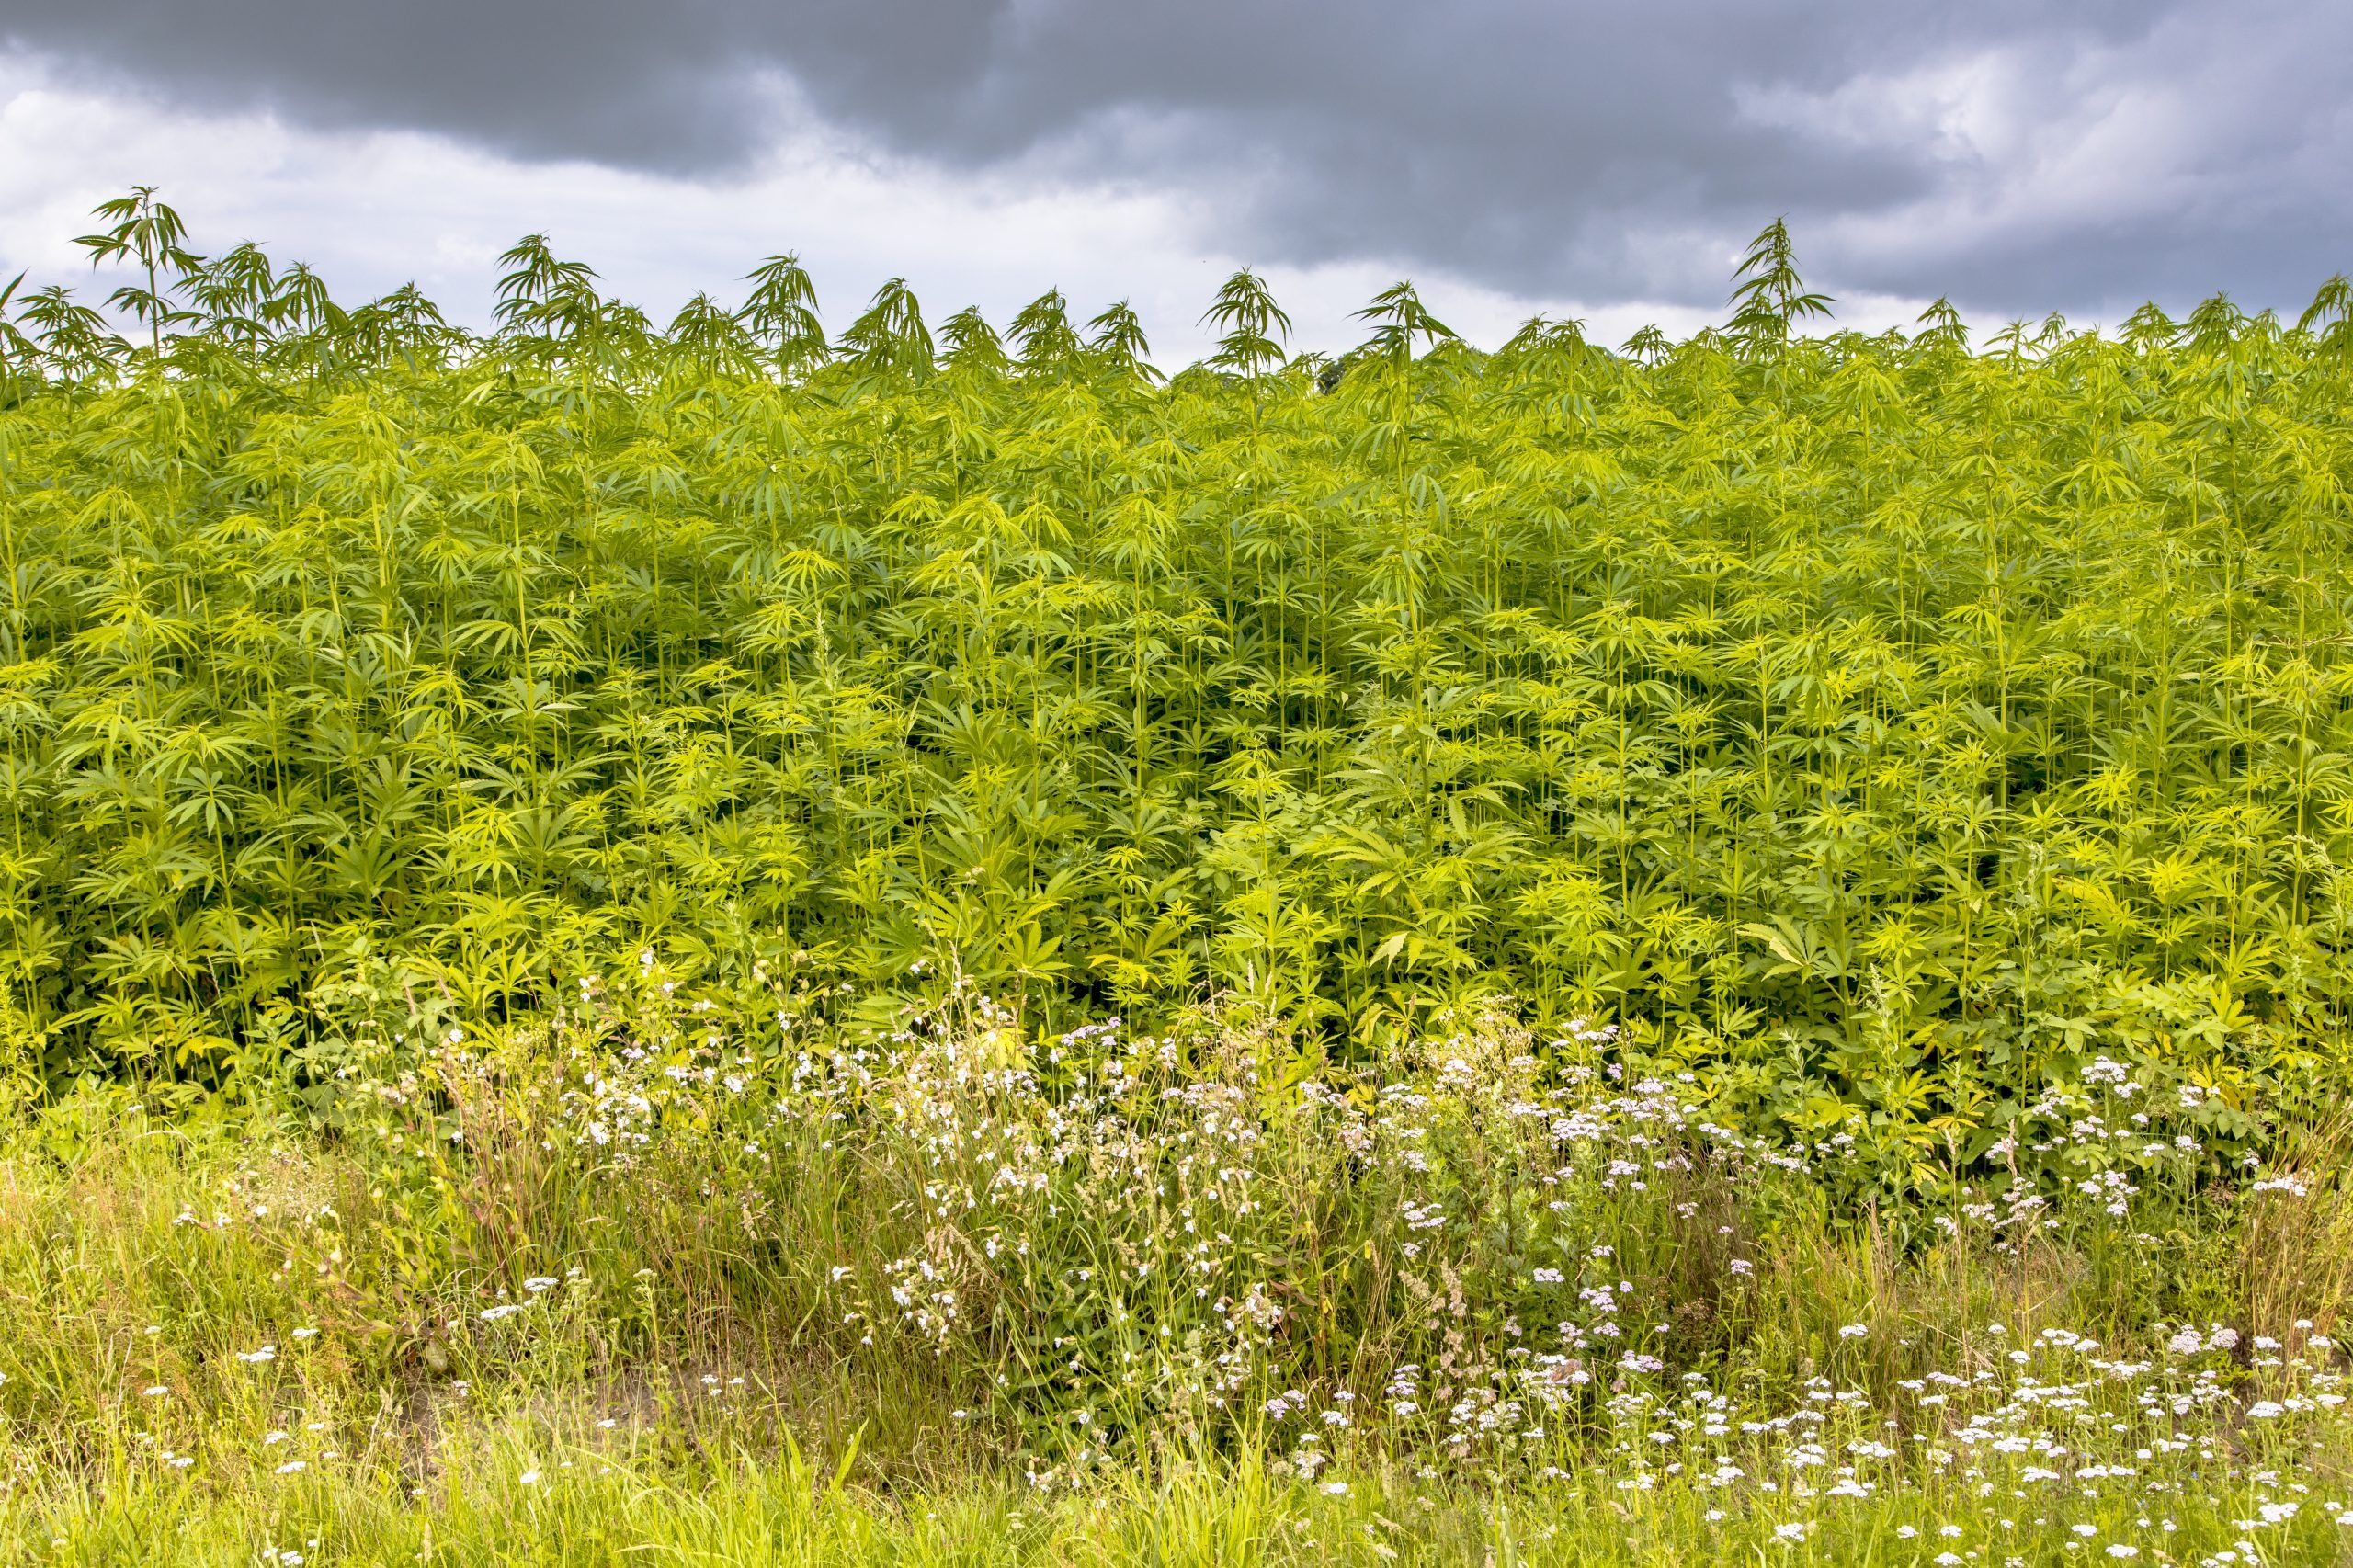 Field of hemp (Cannabis sativa) for industrial application. Agriculture in the Netherlands.